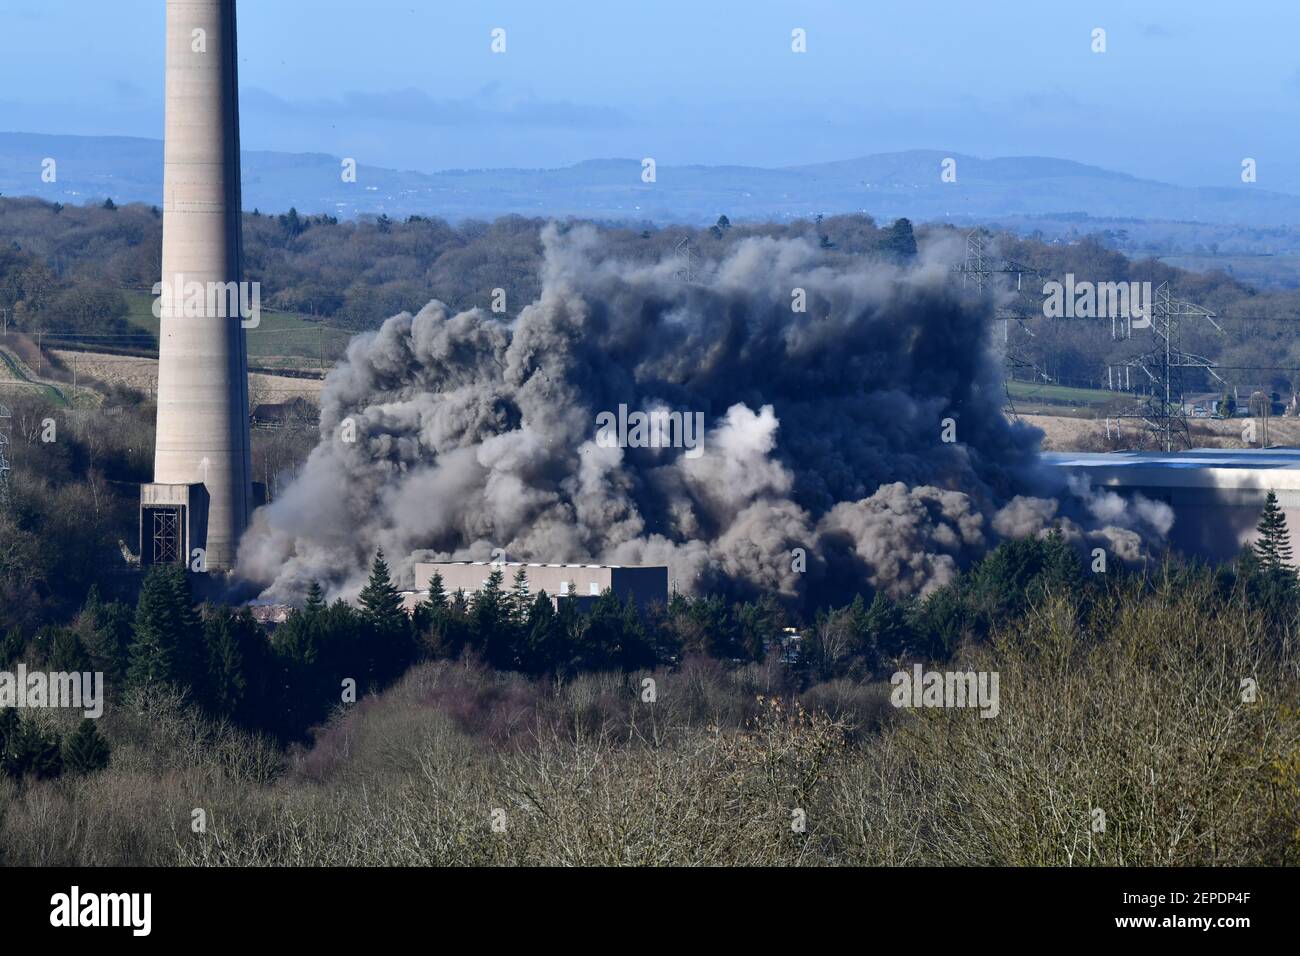 Buildwas, Shropshire, Uk. February 27th 2021 Buildwas Power Station demolished with high explosives. Another one bites the dust! The huge generating hall at Buildwas Power Station near Ironbridge in Shropshire is brought to it's knees by by demolition contractors. Credit: Dave Bagnall/Alamy Live News Stock Photo